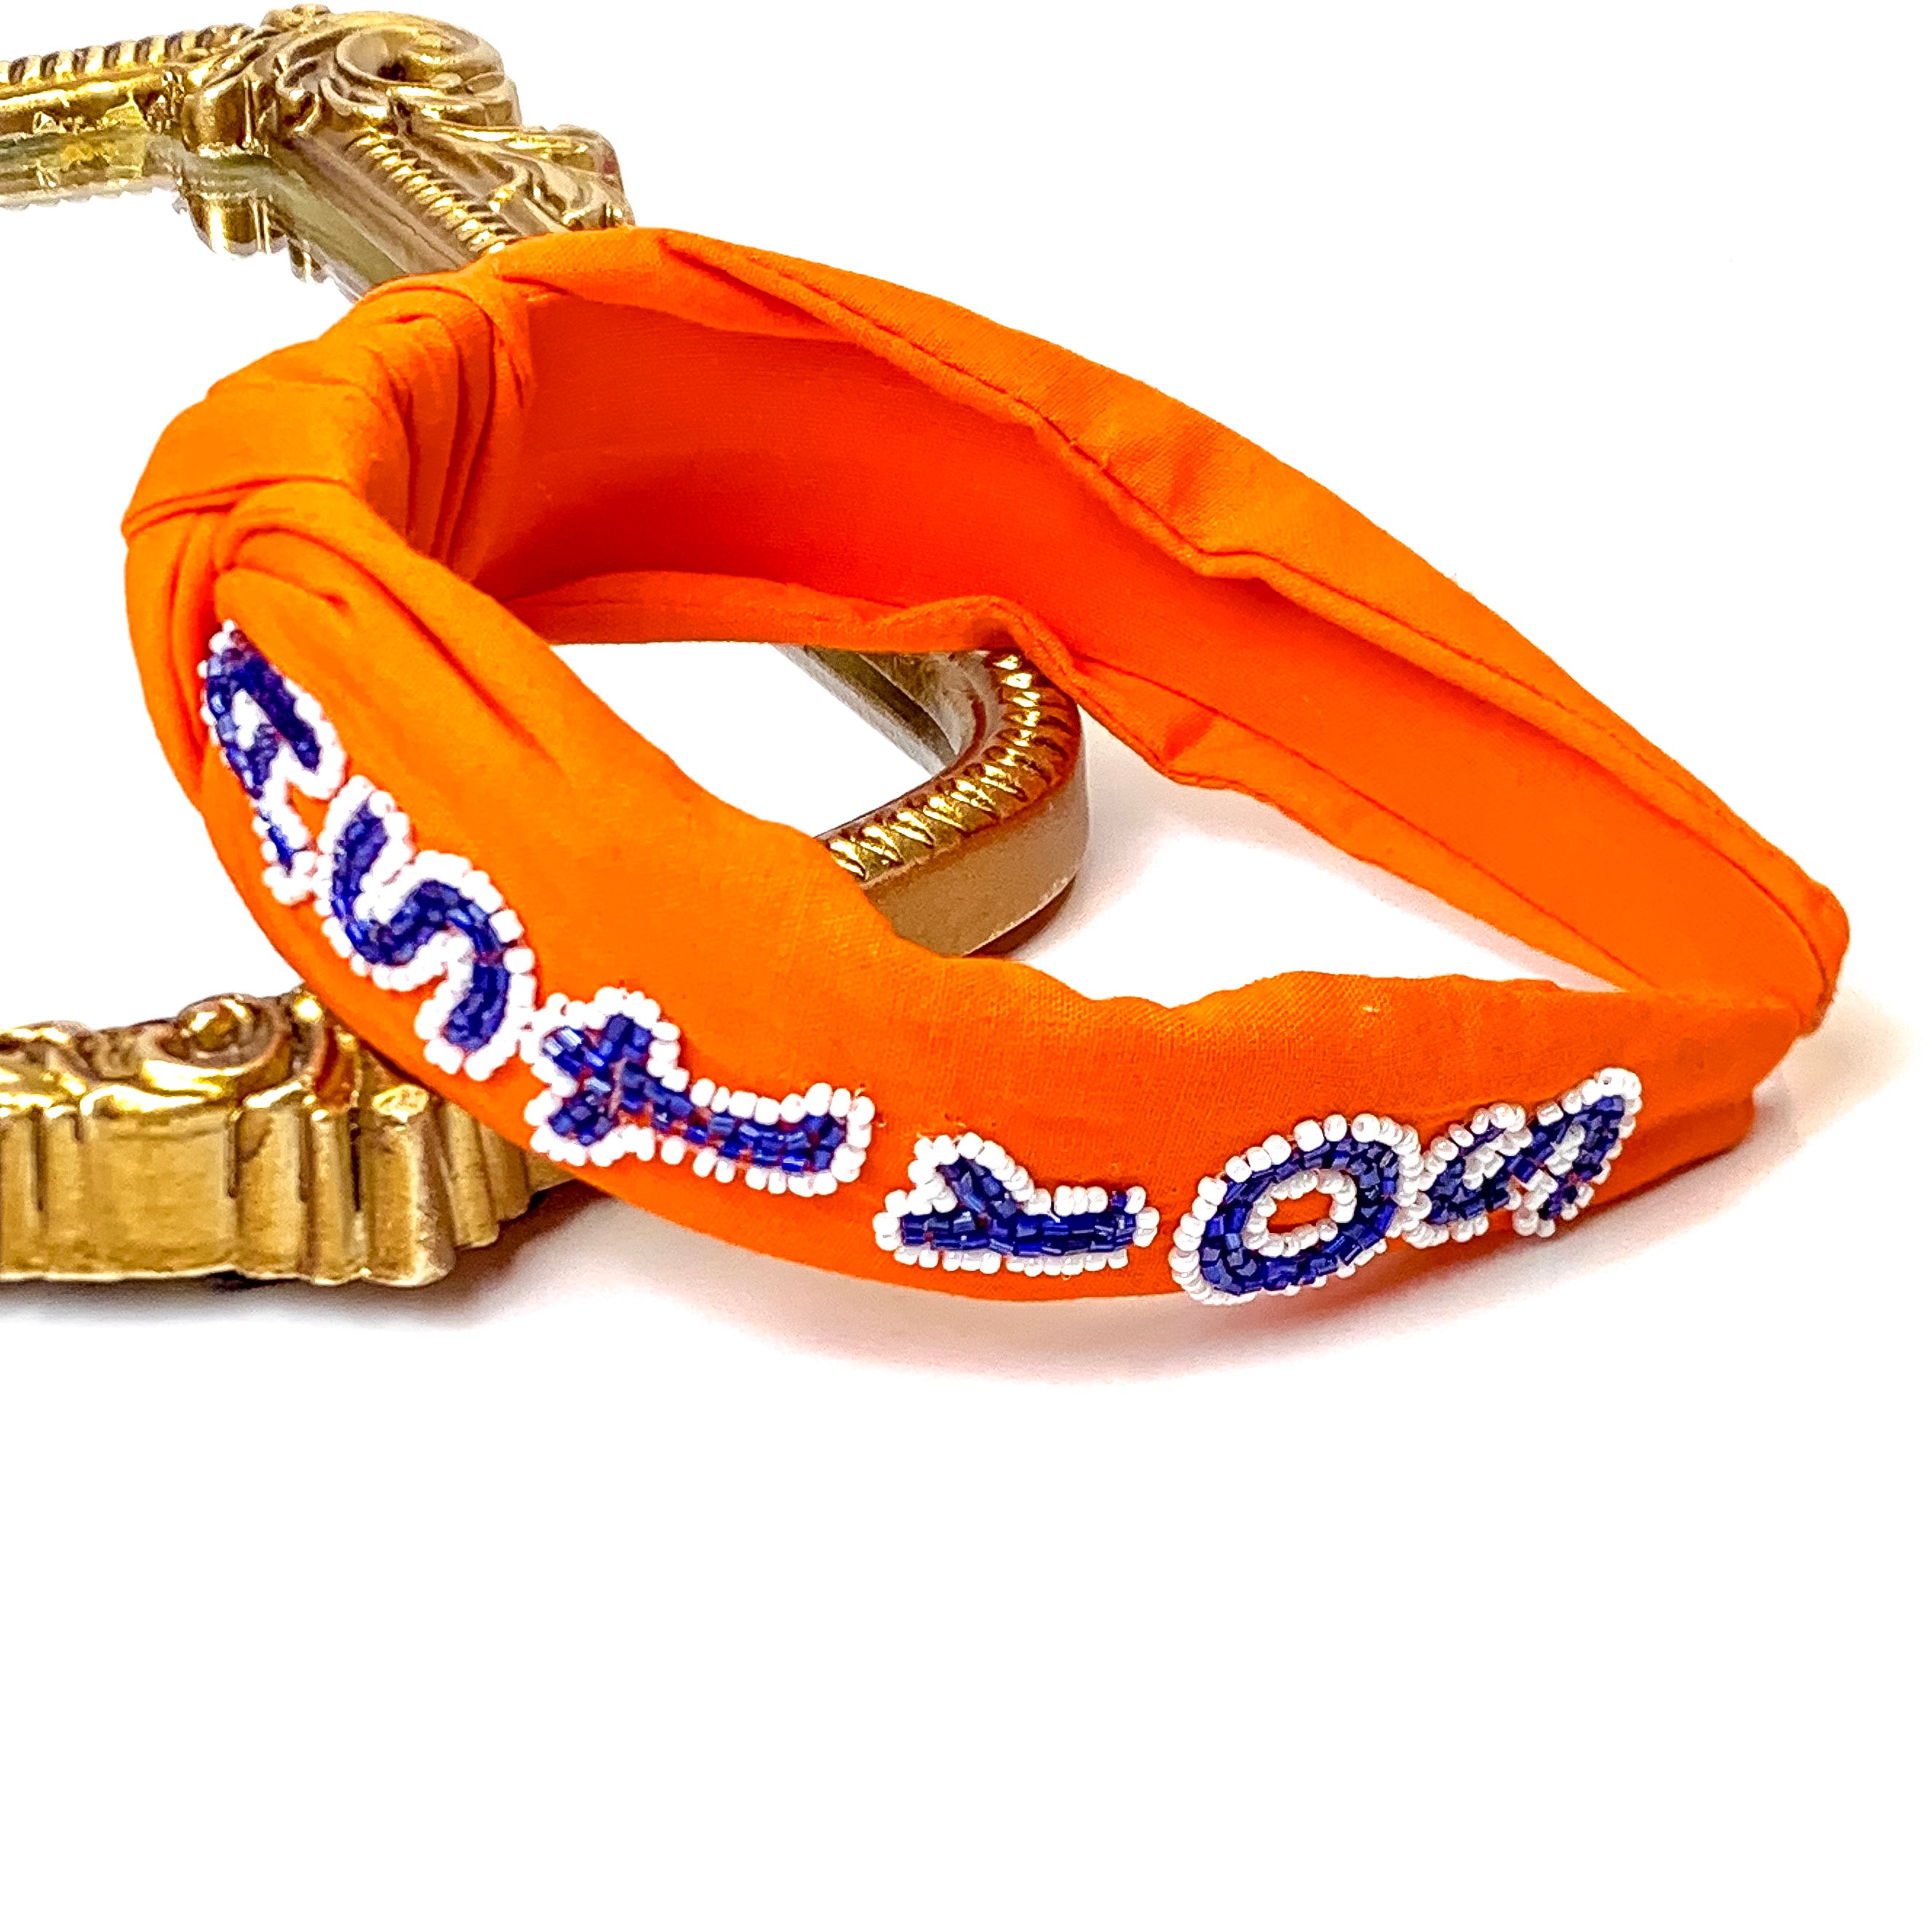 Team Spirit Astros Knot and Sead Beaded Head Band in Orange, Navy Blue, and White - Giddy Up Glamour Boutique